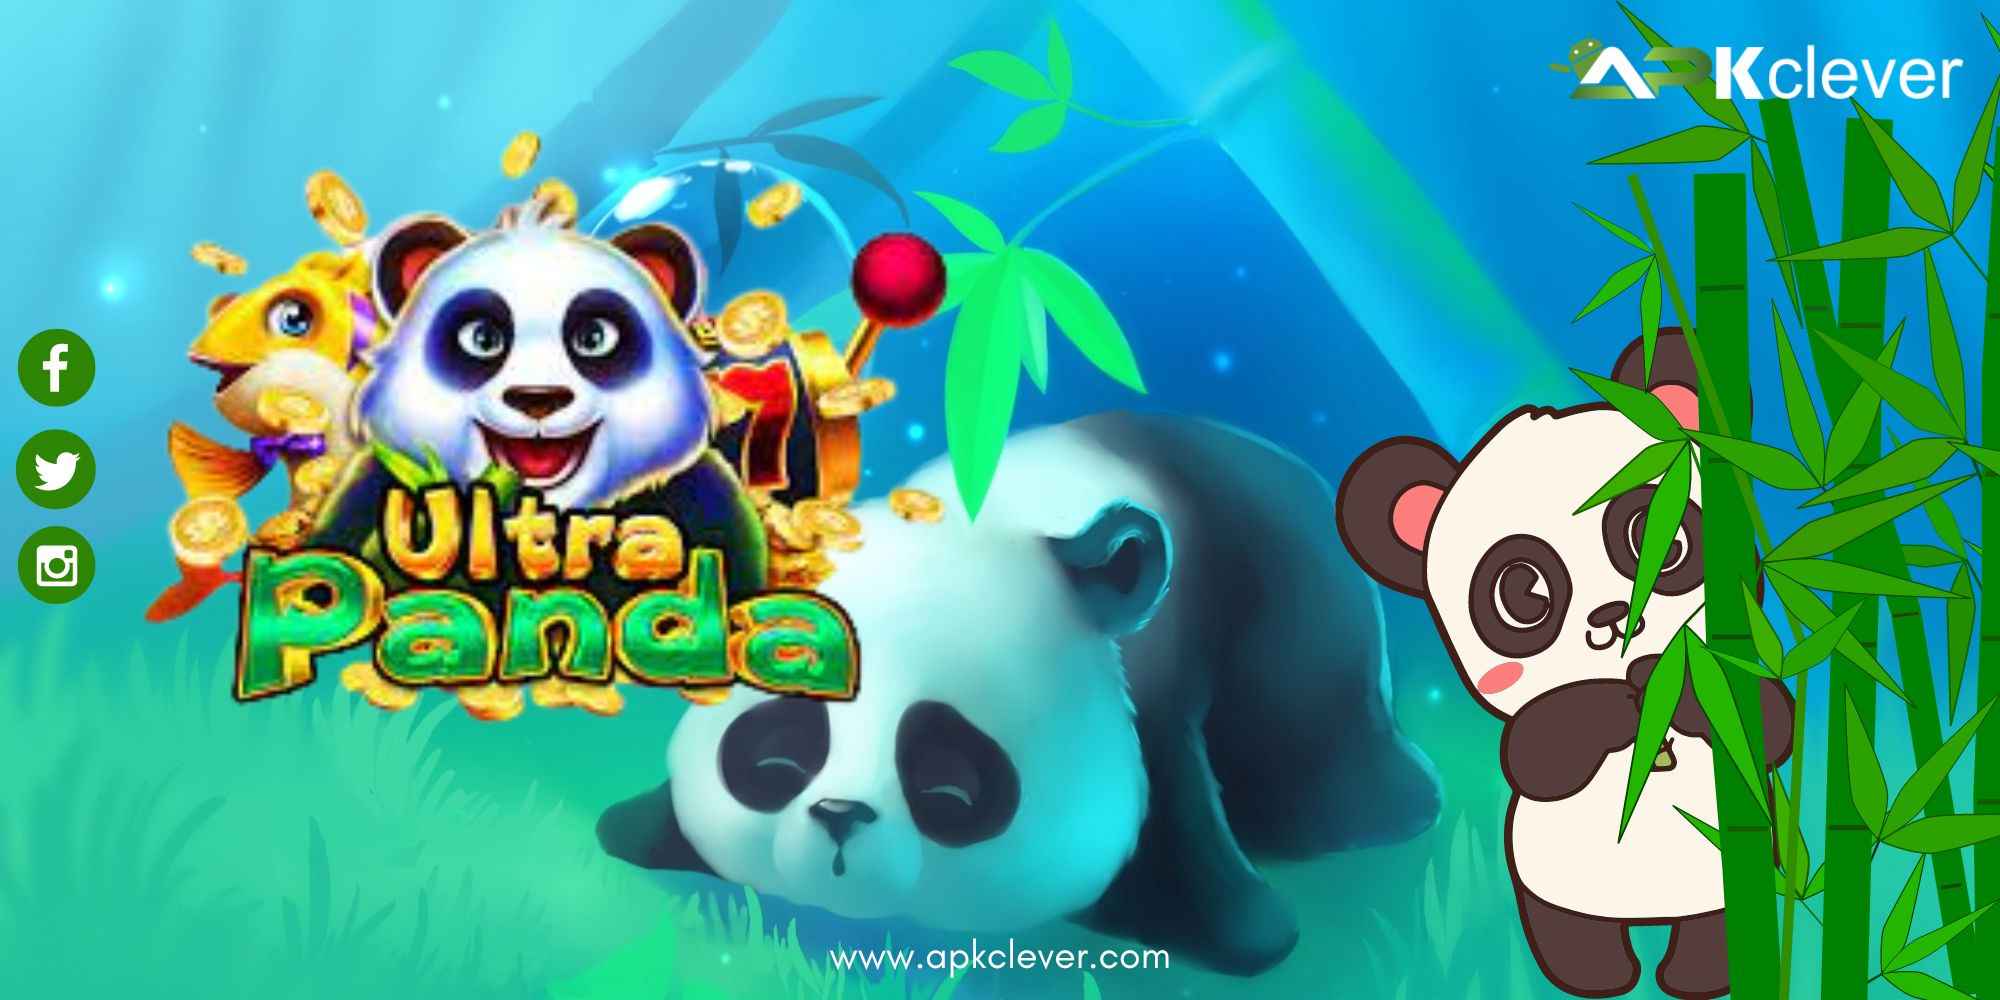 Ultra Panda Apk Download [Latest Version] For Android - Apkclever